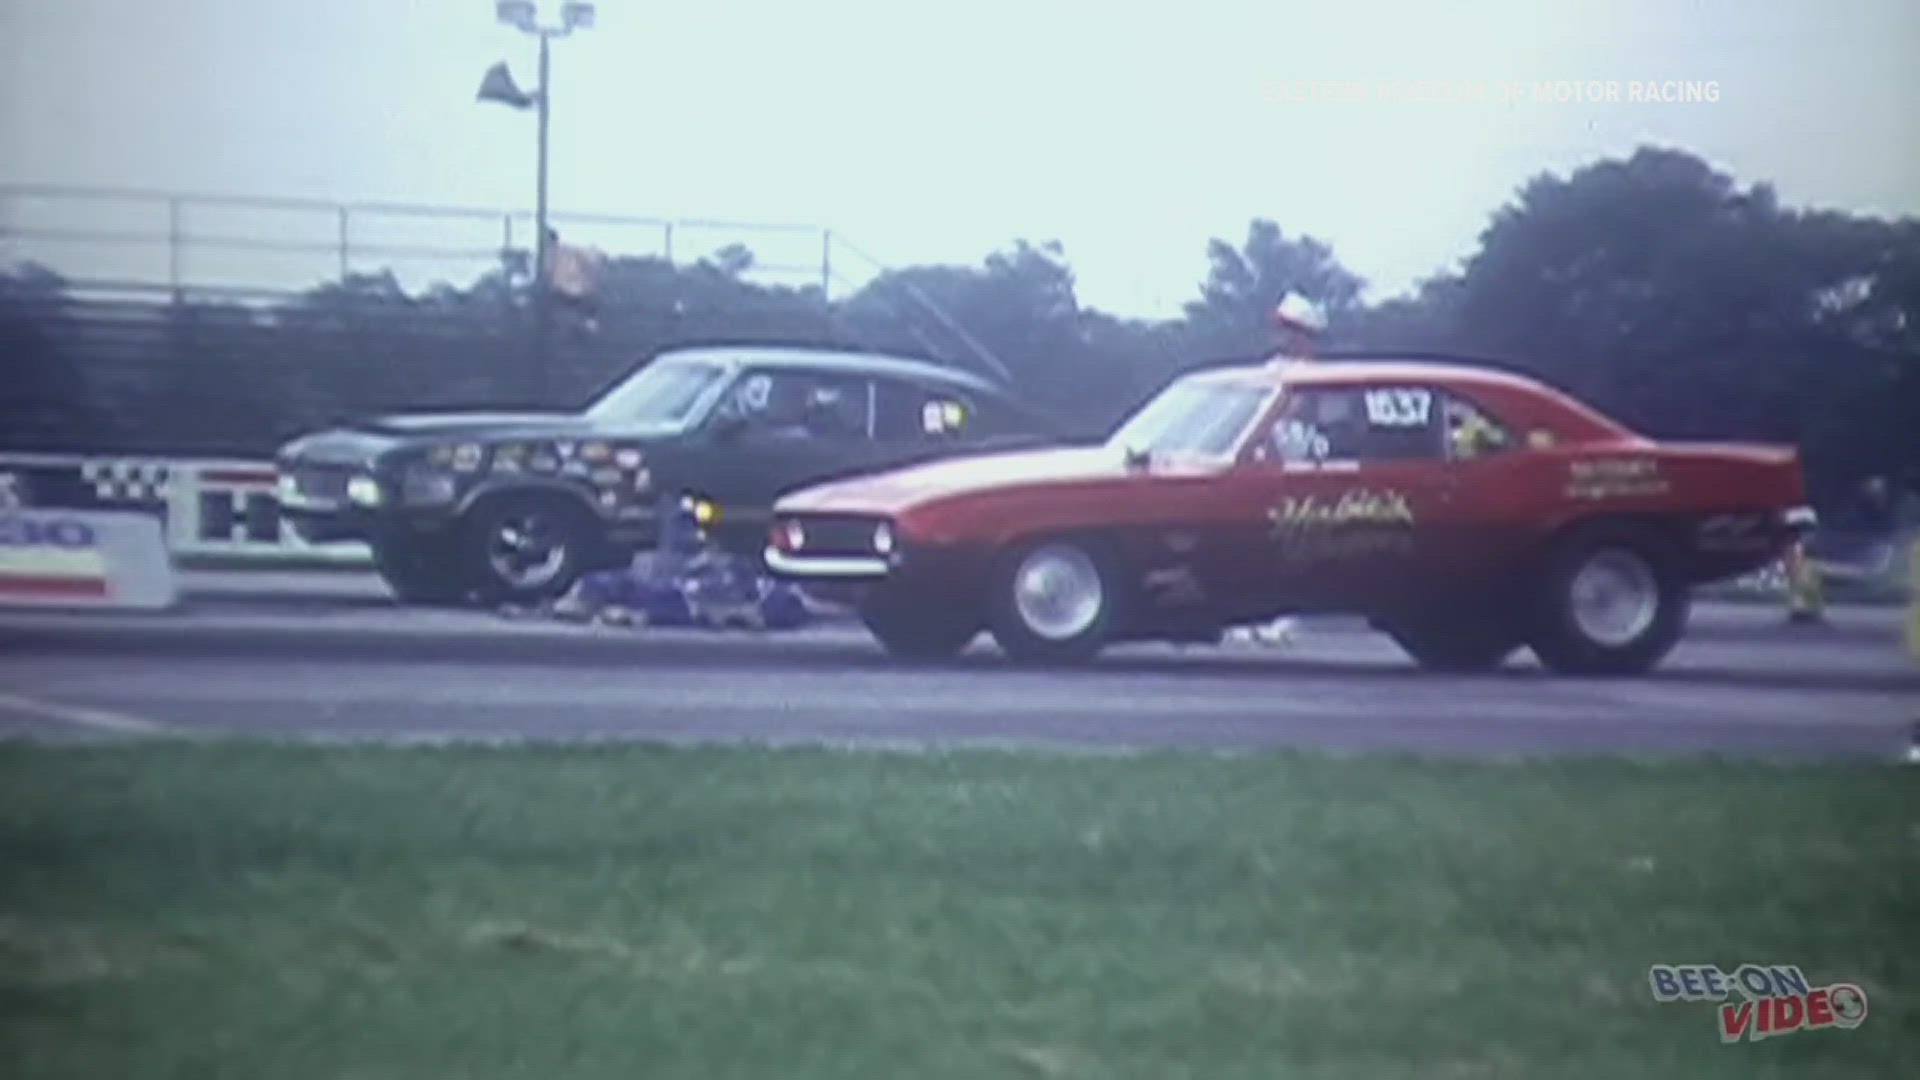 Racers raced the U.S. 30 drag strip from 1960 to 1979, sharing the runway with air traffic.